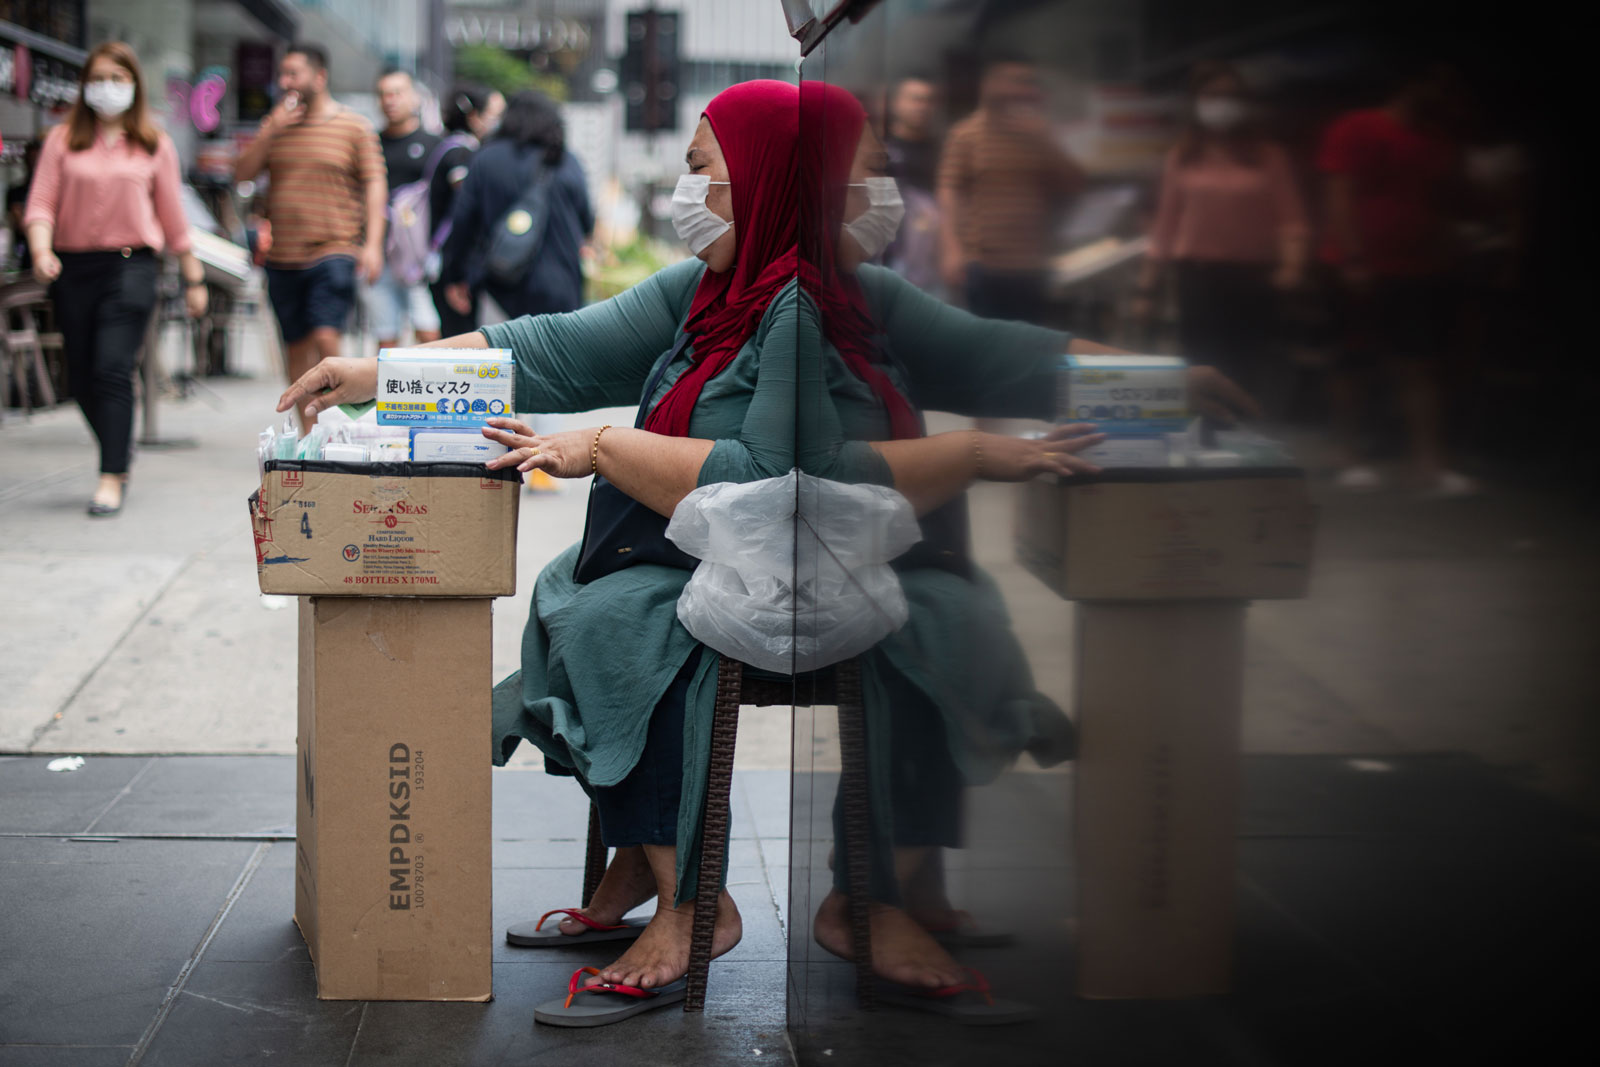 A woman sells protective facemasks amid fears over the spread of the novel coronavirus in Kuala Lumpur on February 13.